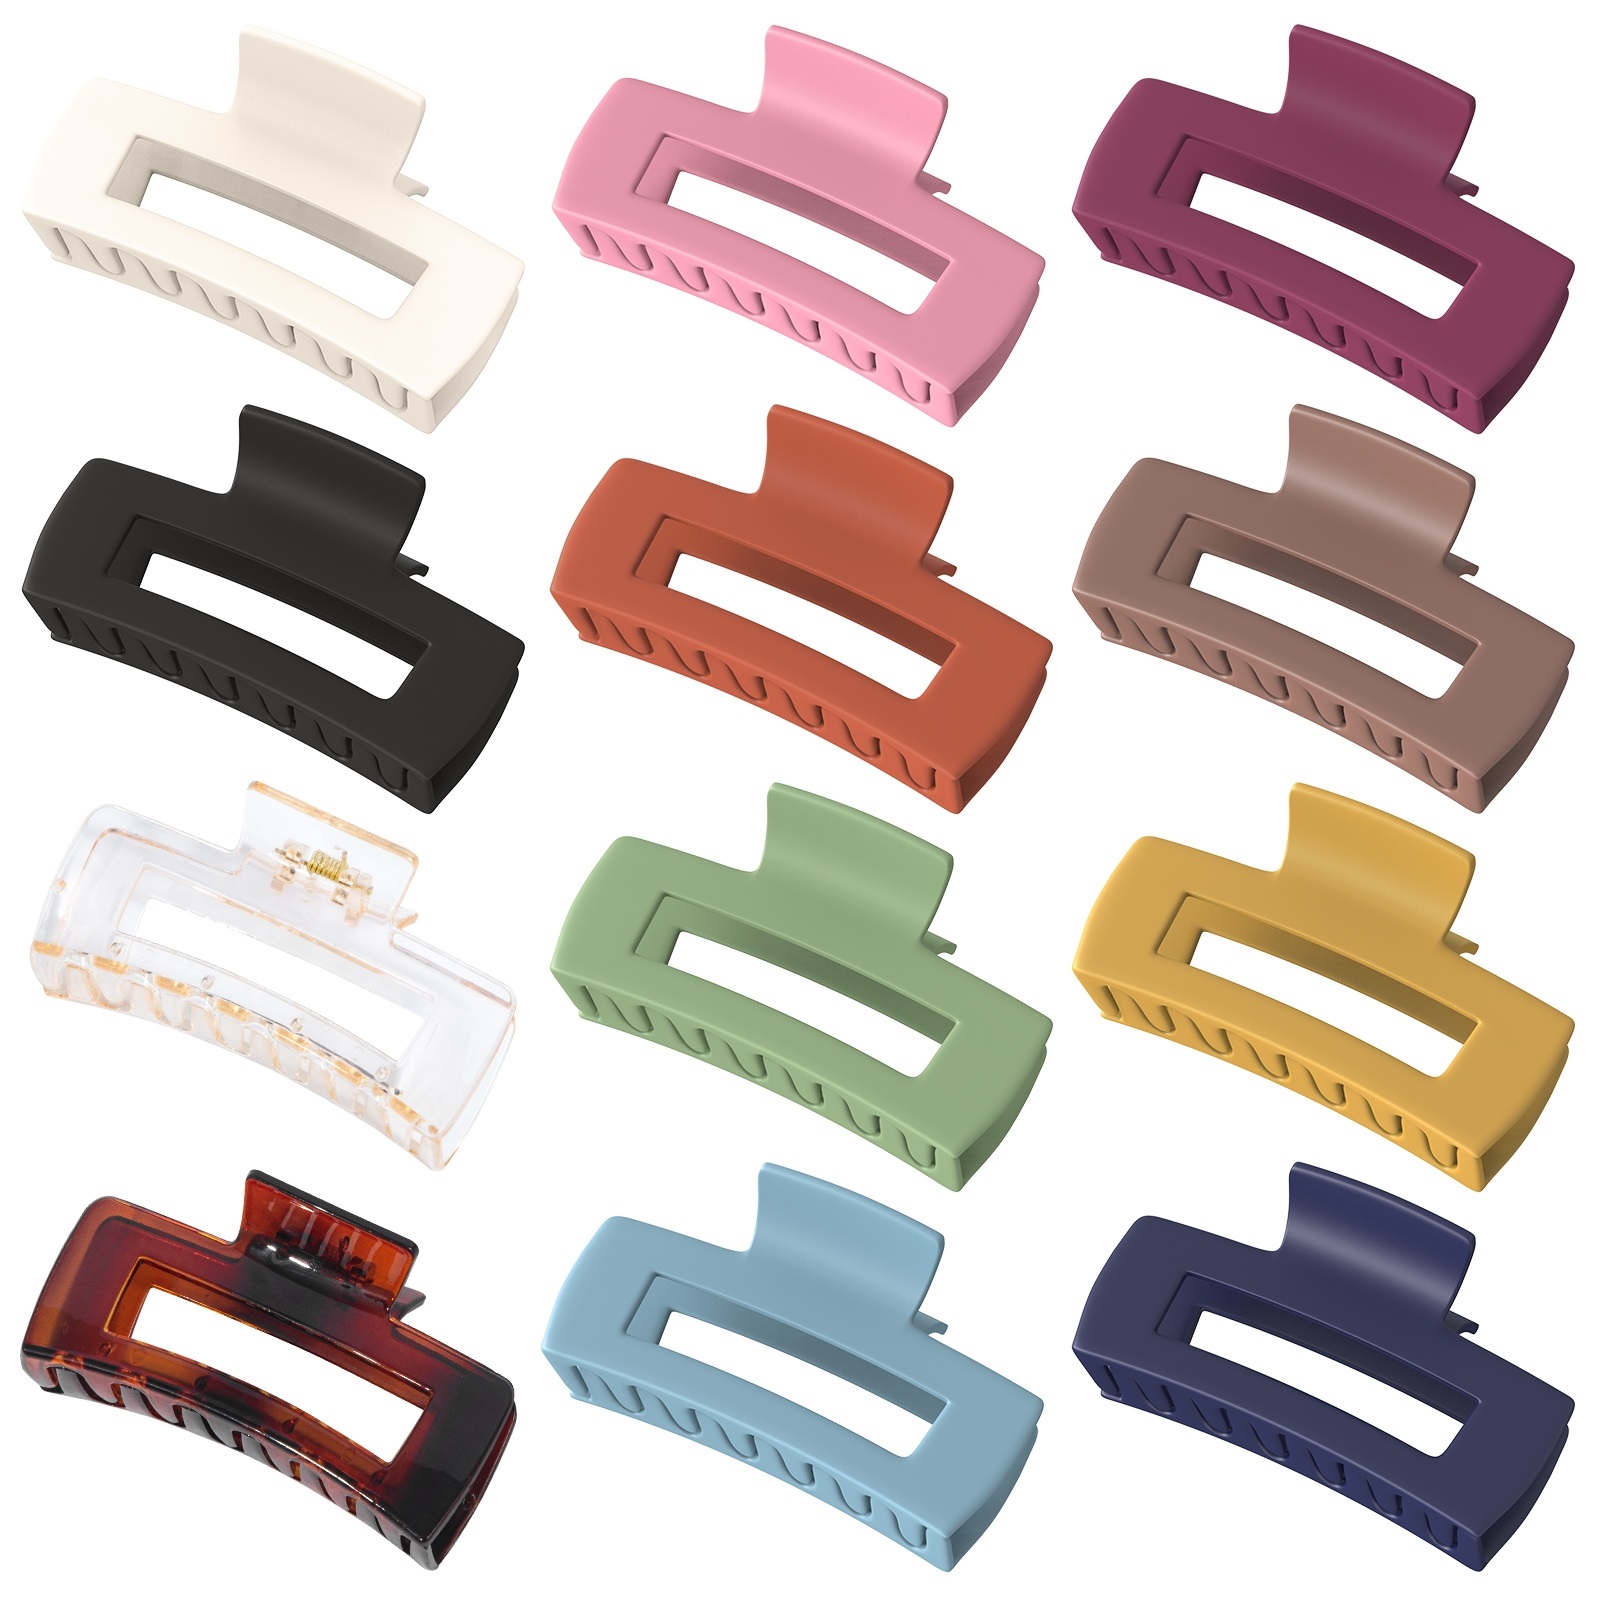 Vigorpace 12 Pack Large Hair Claw Clips for Women Thick Thin Hair, Rectangular Hair Clips for Styling Accessories, Strong Hold Matte Clip - image 1 of 7